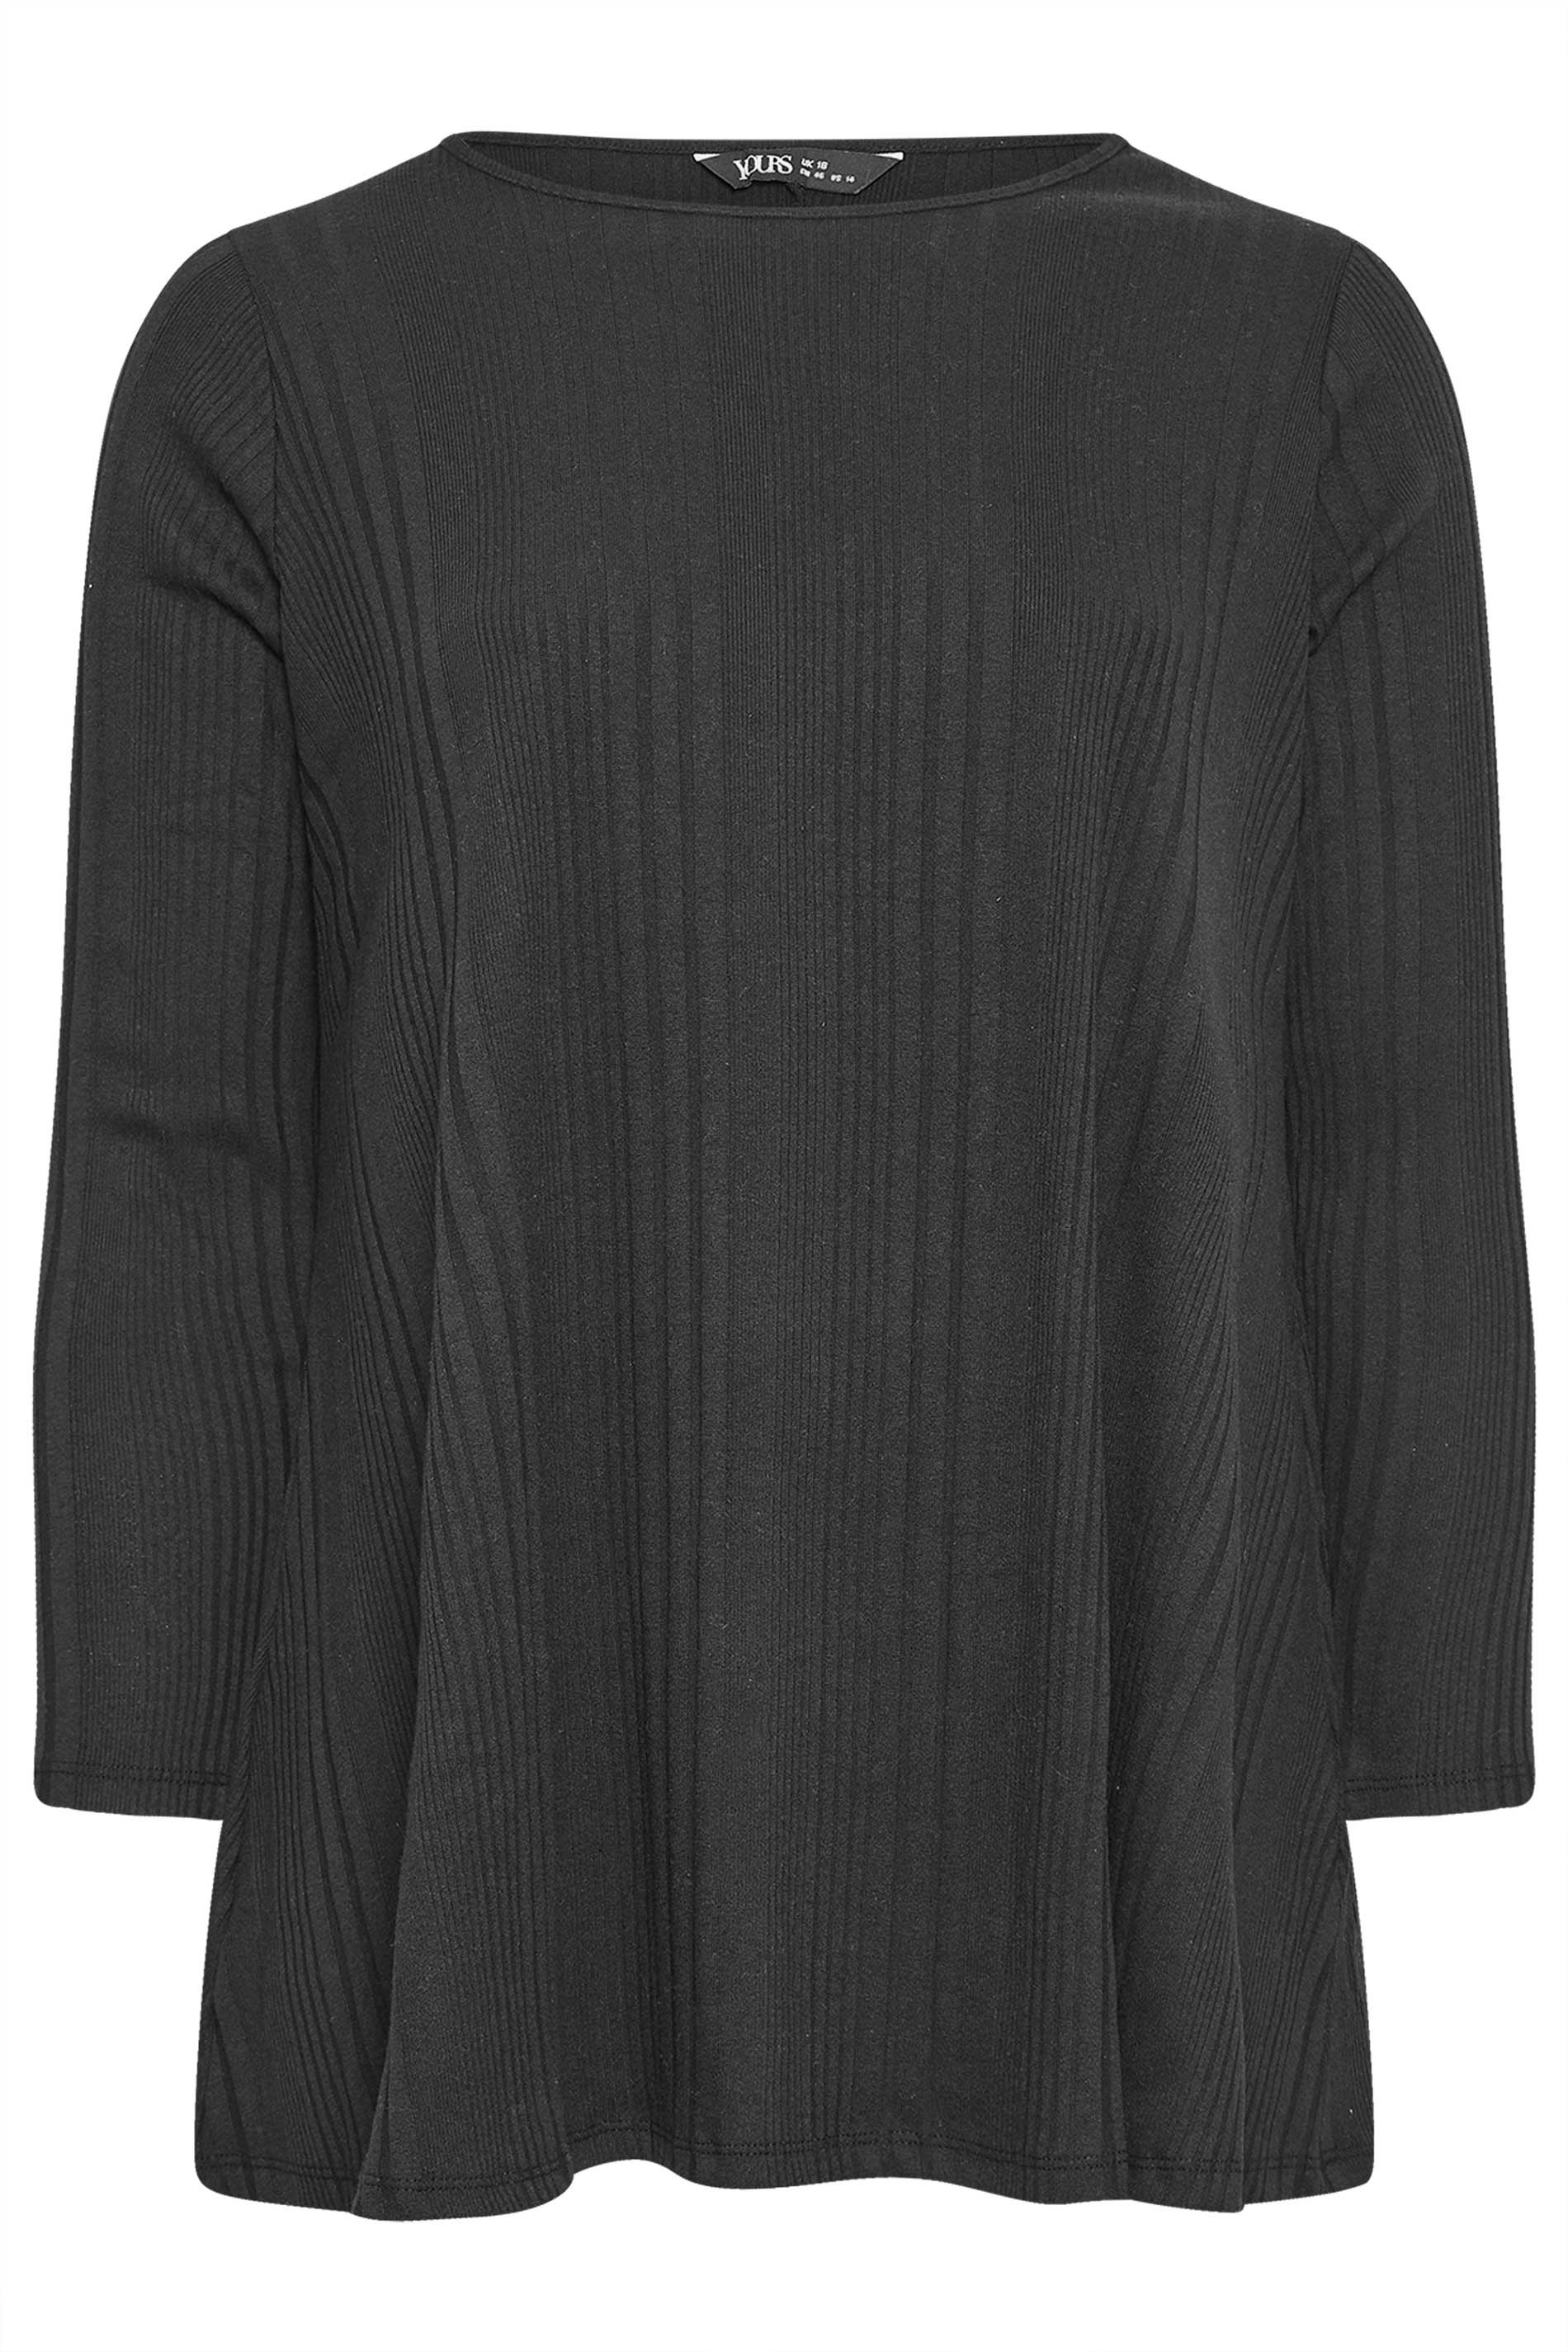 YOURS Plus Size Black Ribbed Long Sleeve Top | Yours Clothing